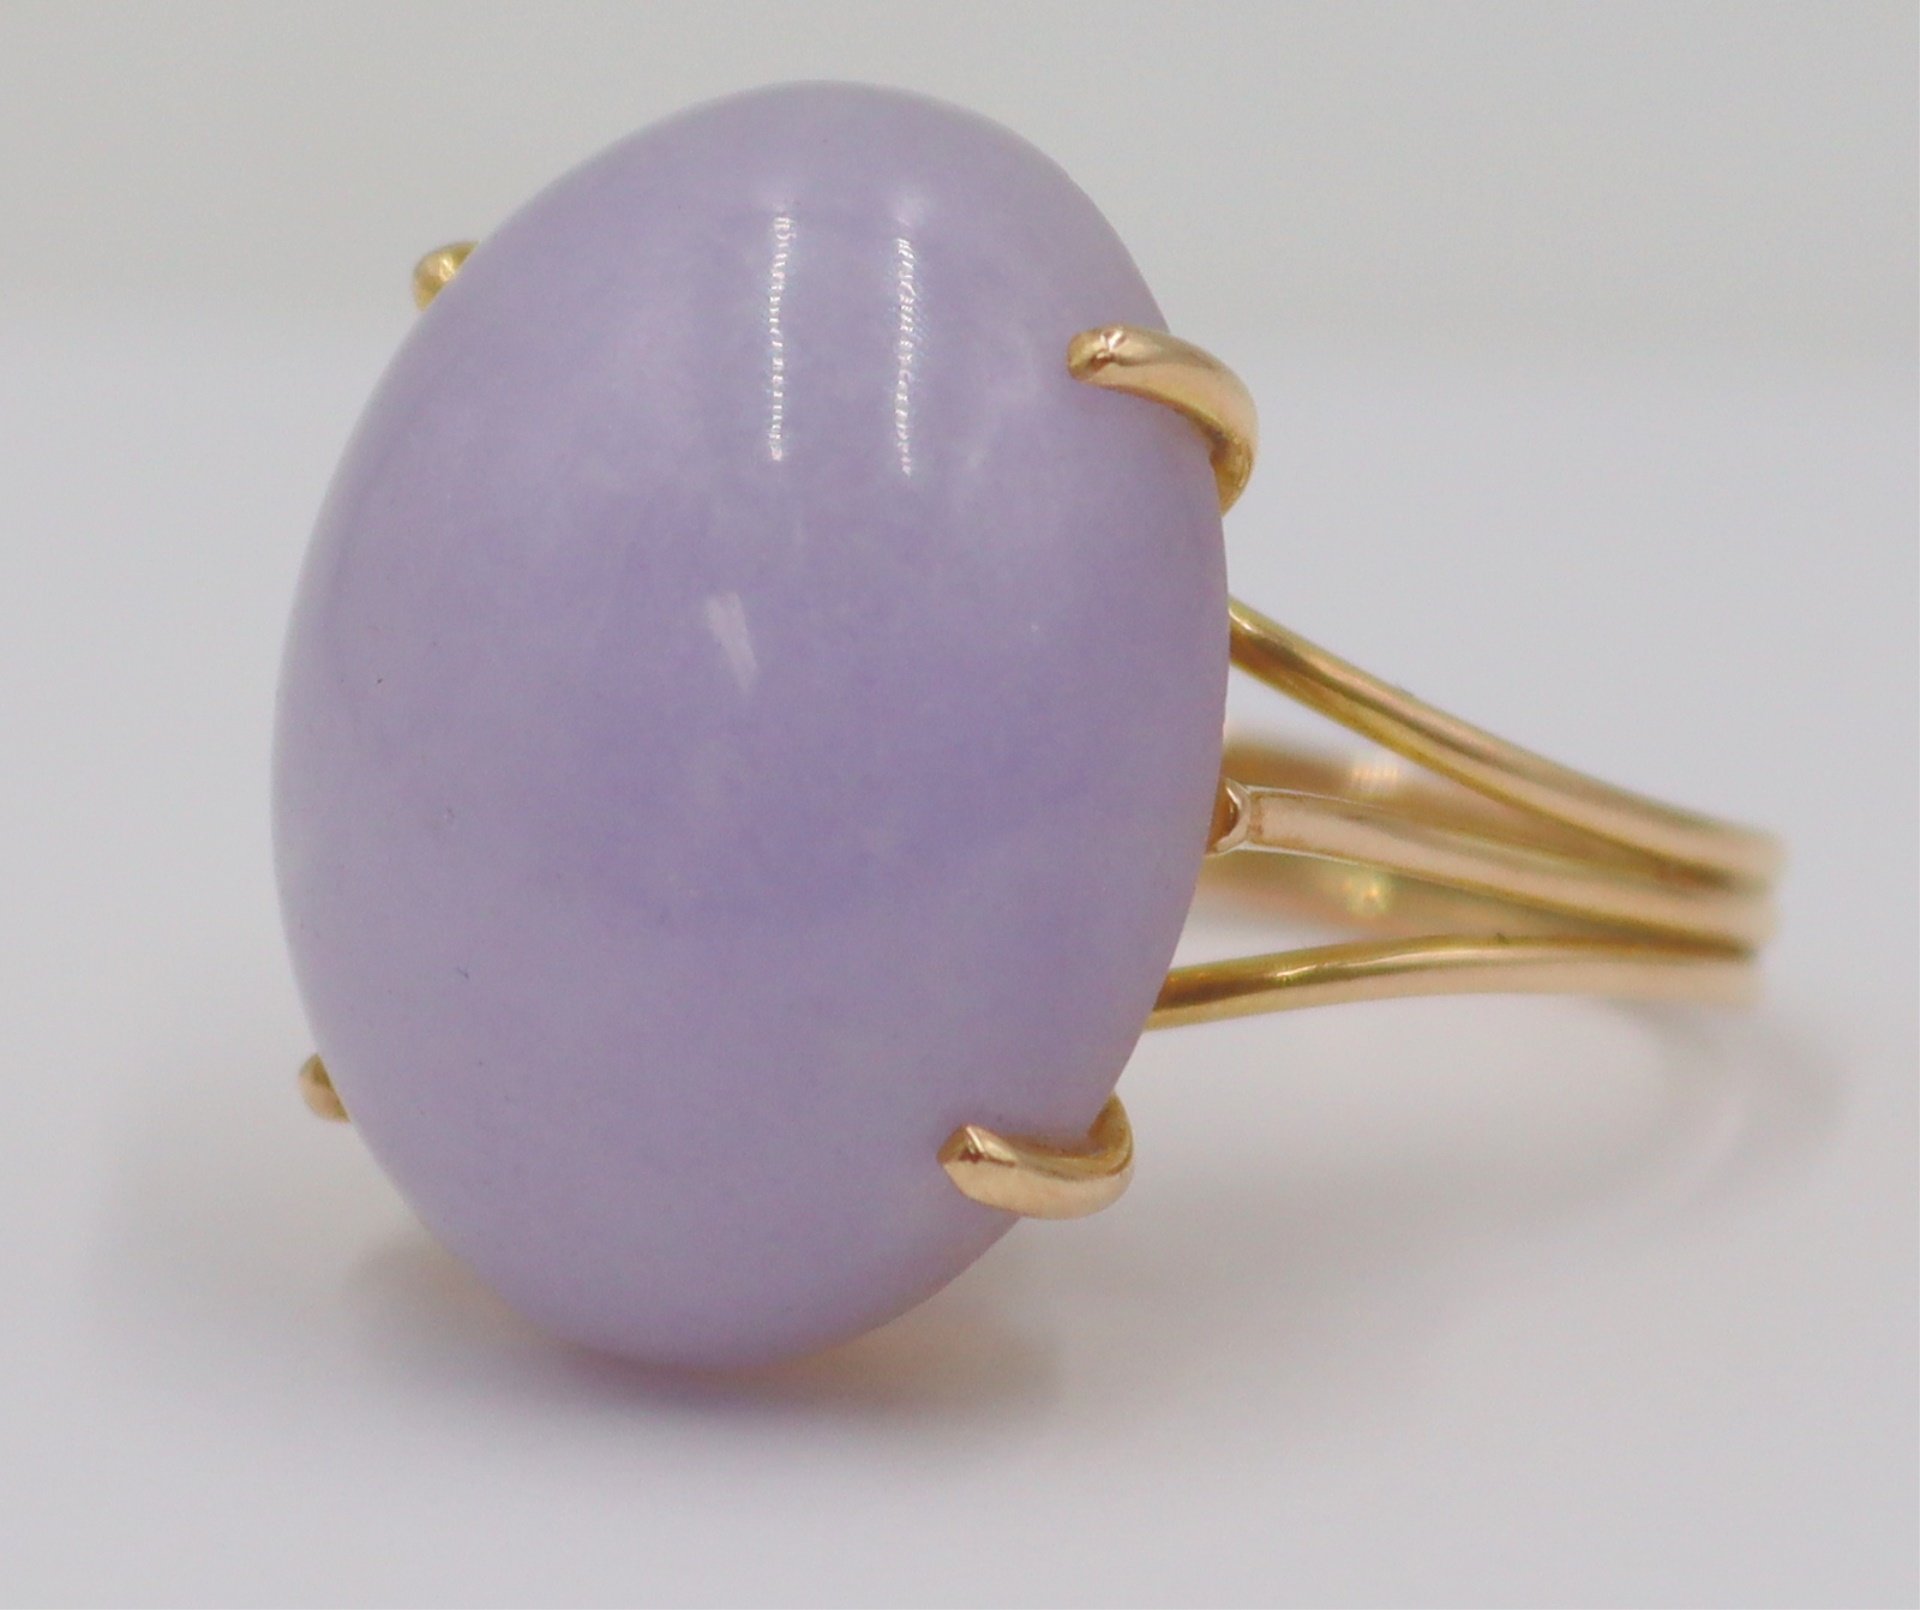 JEWELRY. 14KT GOLD AND LAVENDER